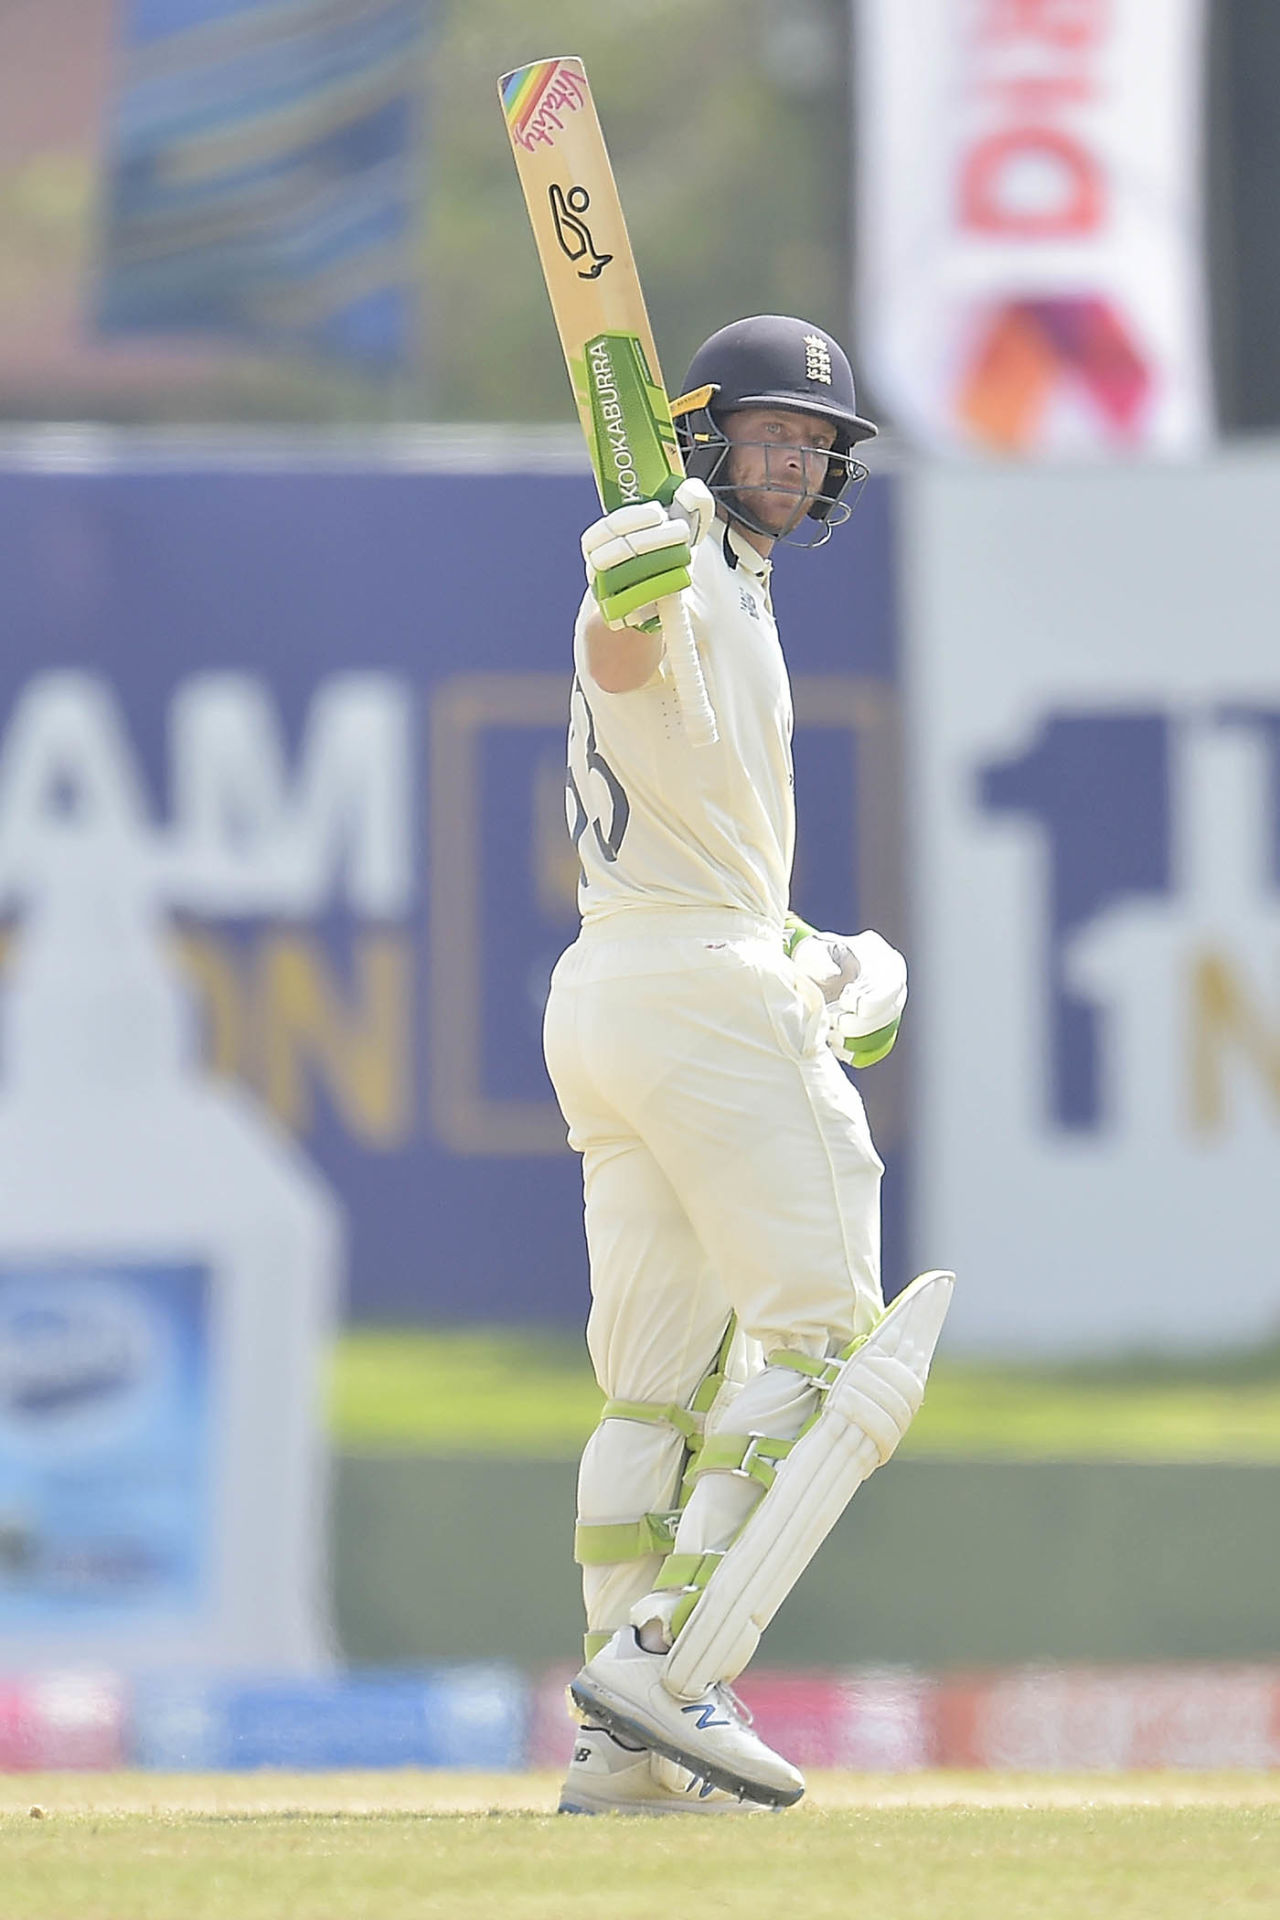 Jos Buttler breezed to fifty, Sri Lanka vs England, 2nd Test, Galle, 3rd day, January 24, 2021